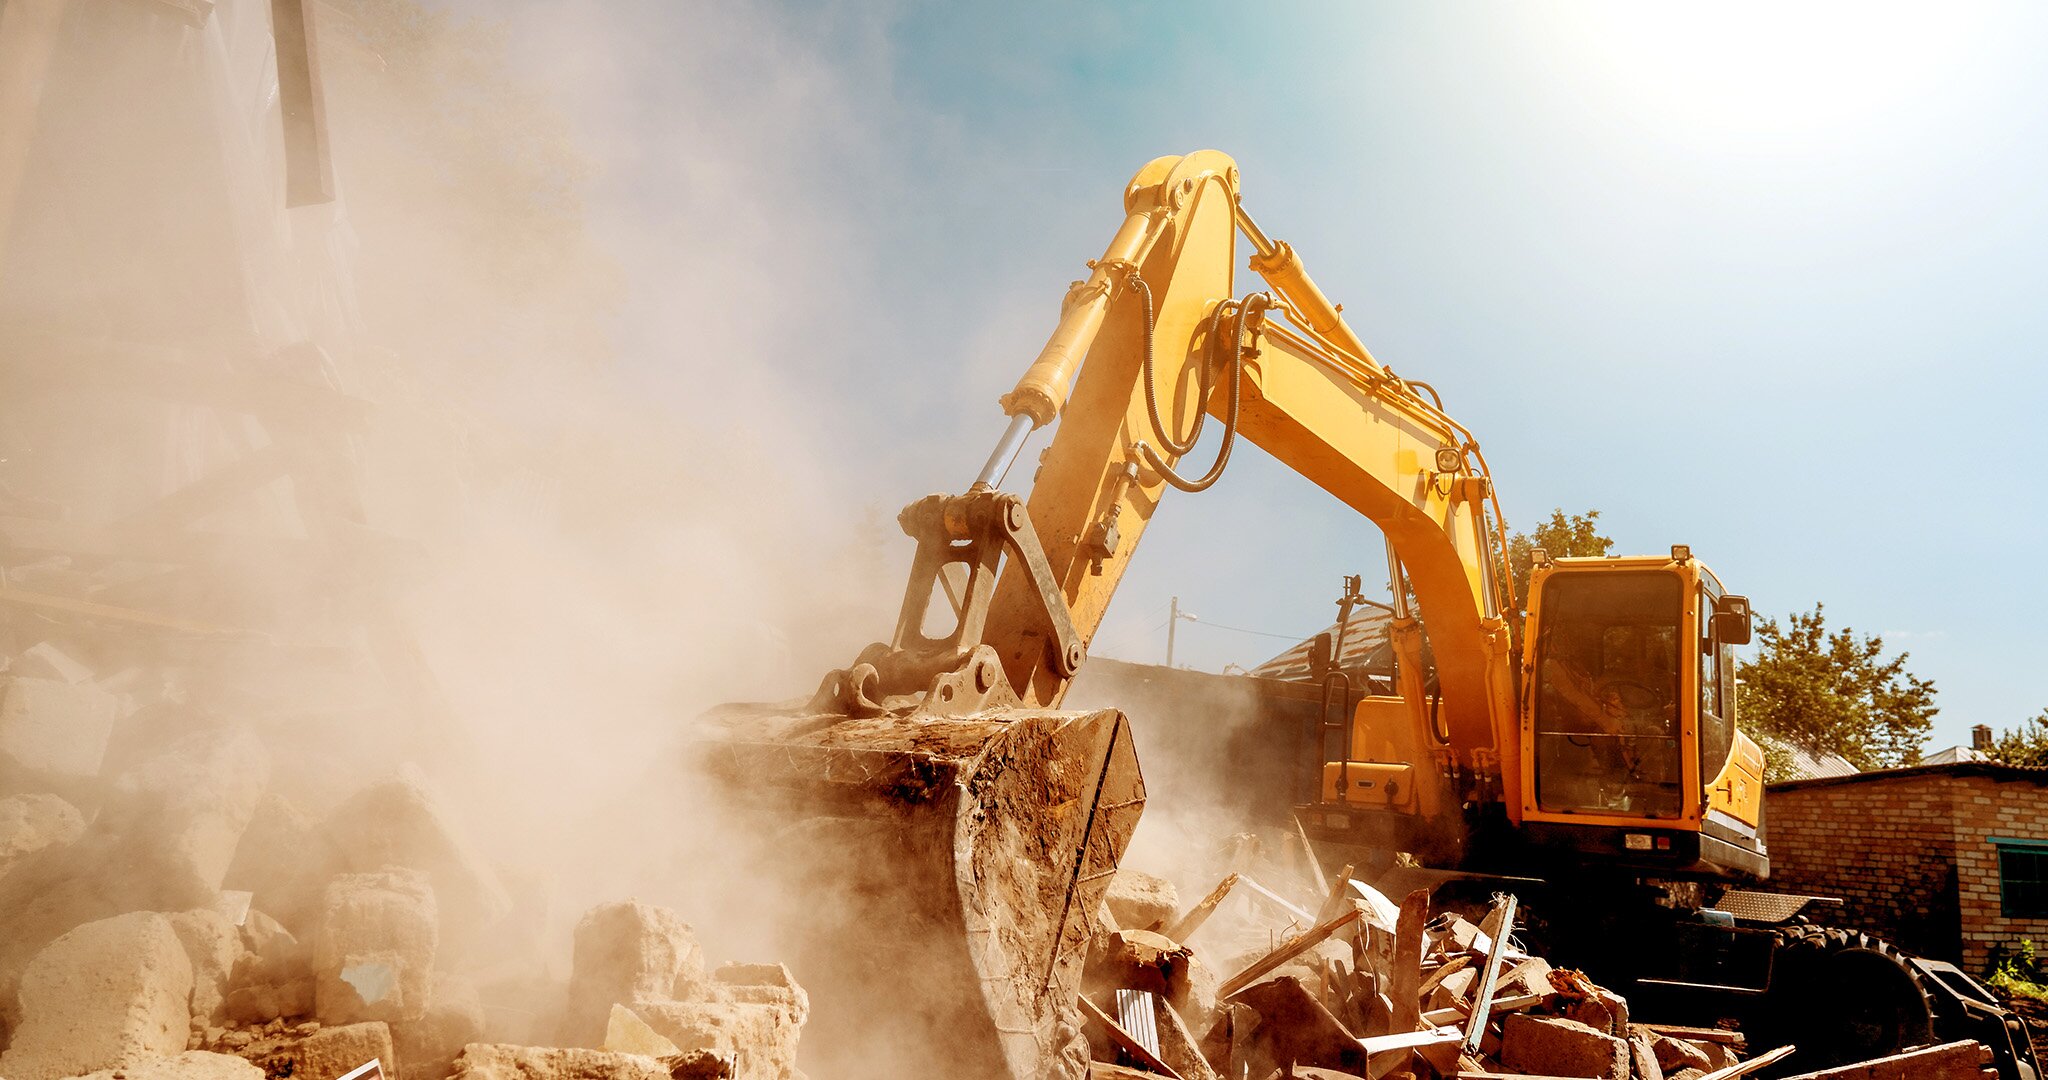 Working conditions on construction sites are often extremely dusty and can push construction machines to the limit.